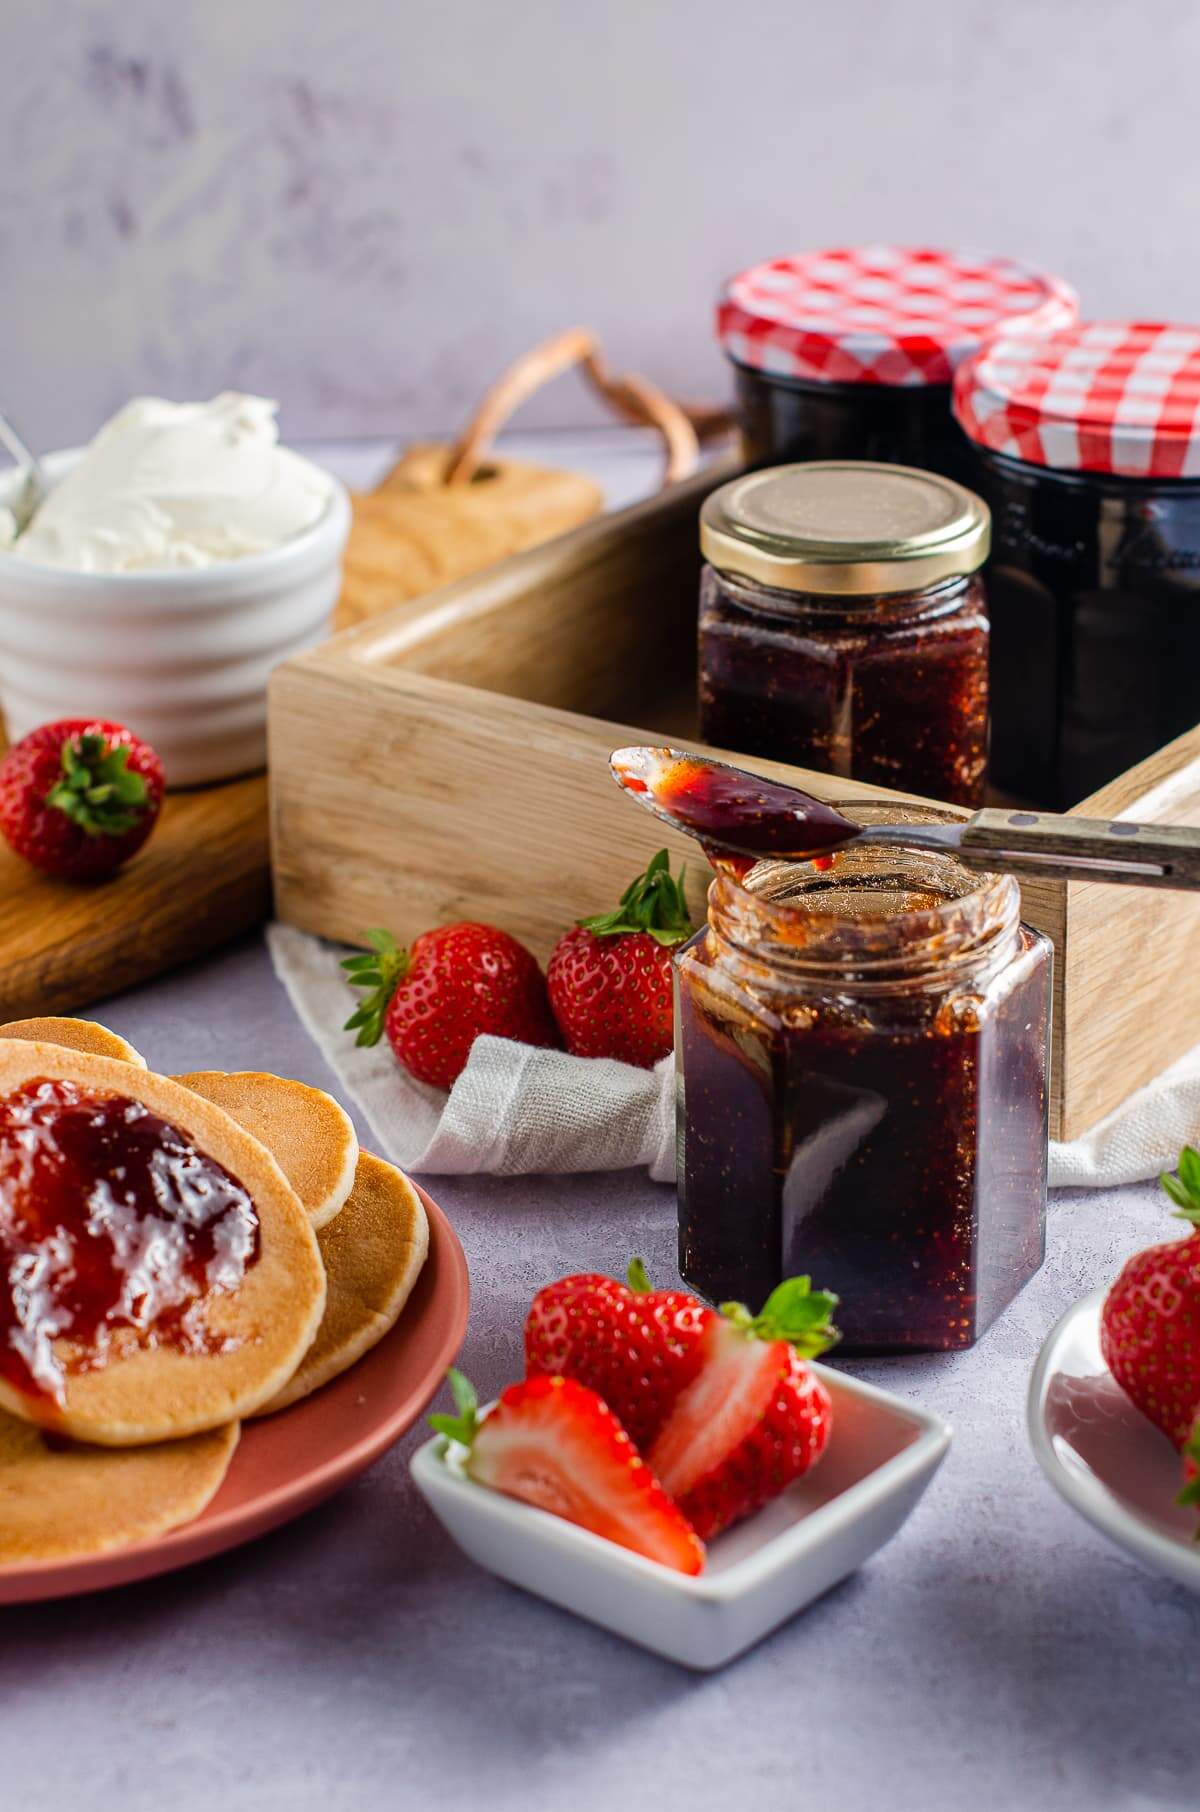 Strawberries and jam with pancakes as a breakfast scene.